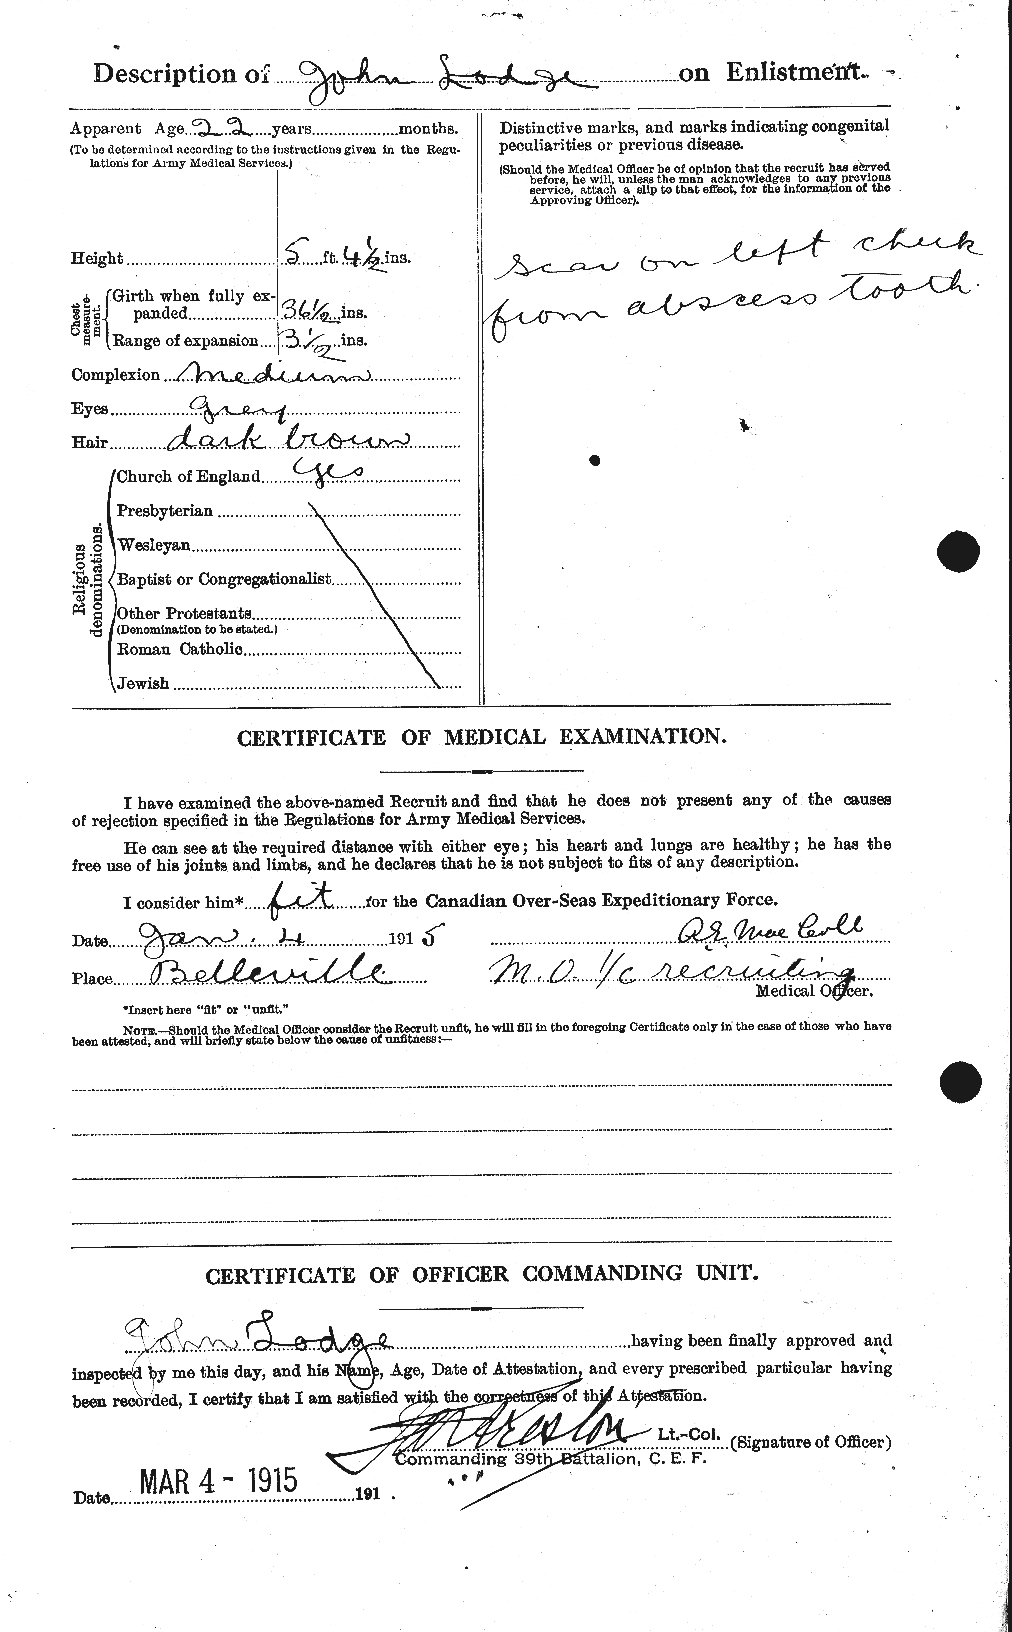 Personnel Records of the First World War - CEF 464811b